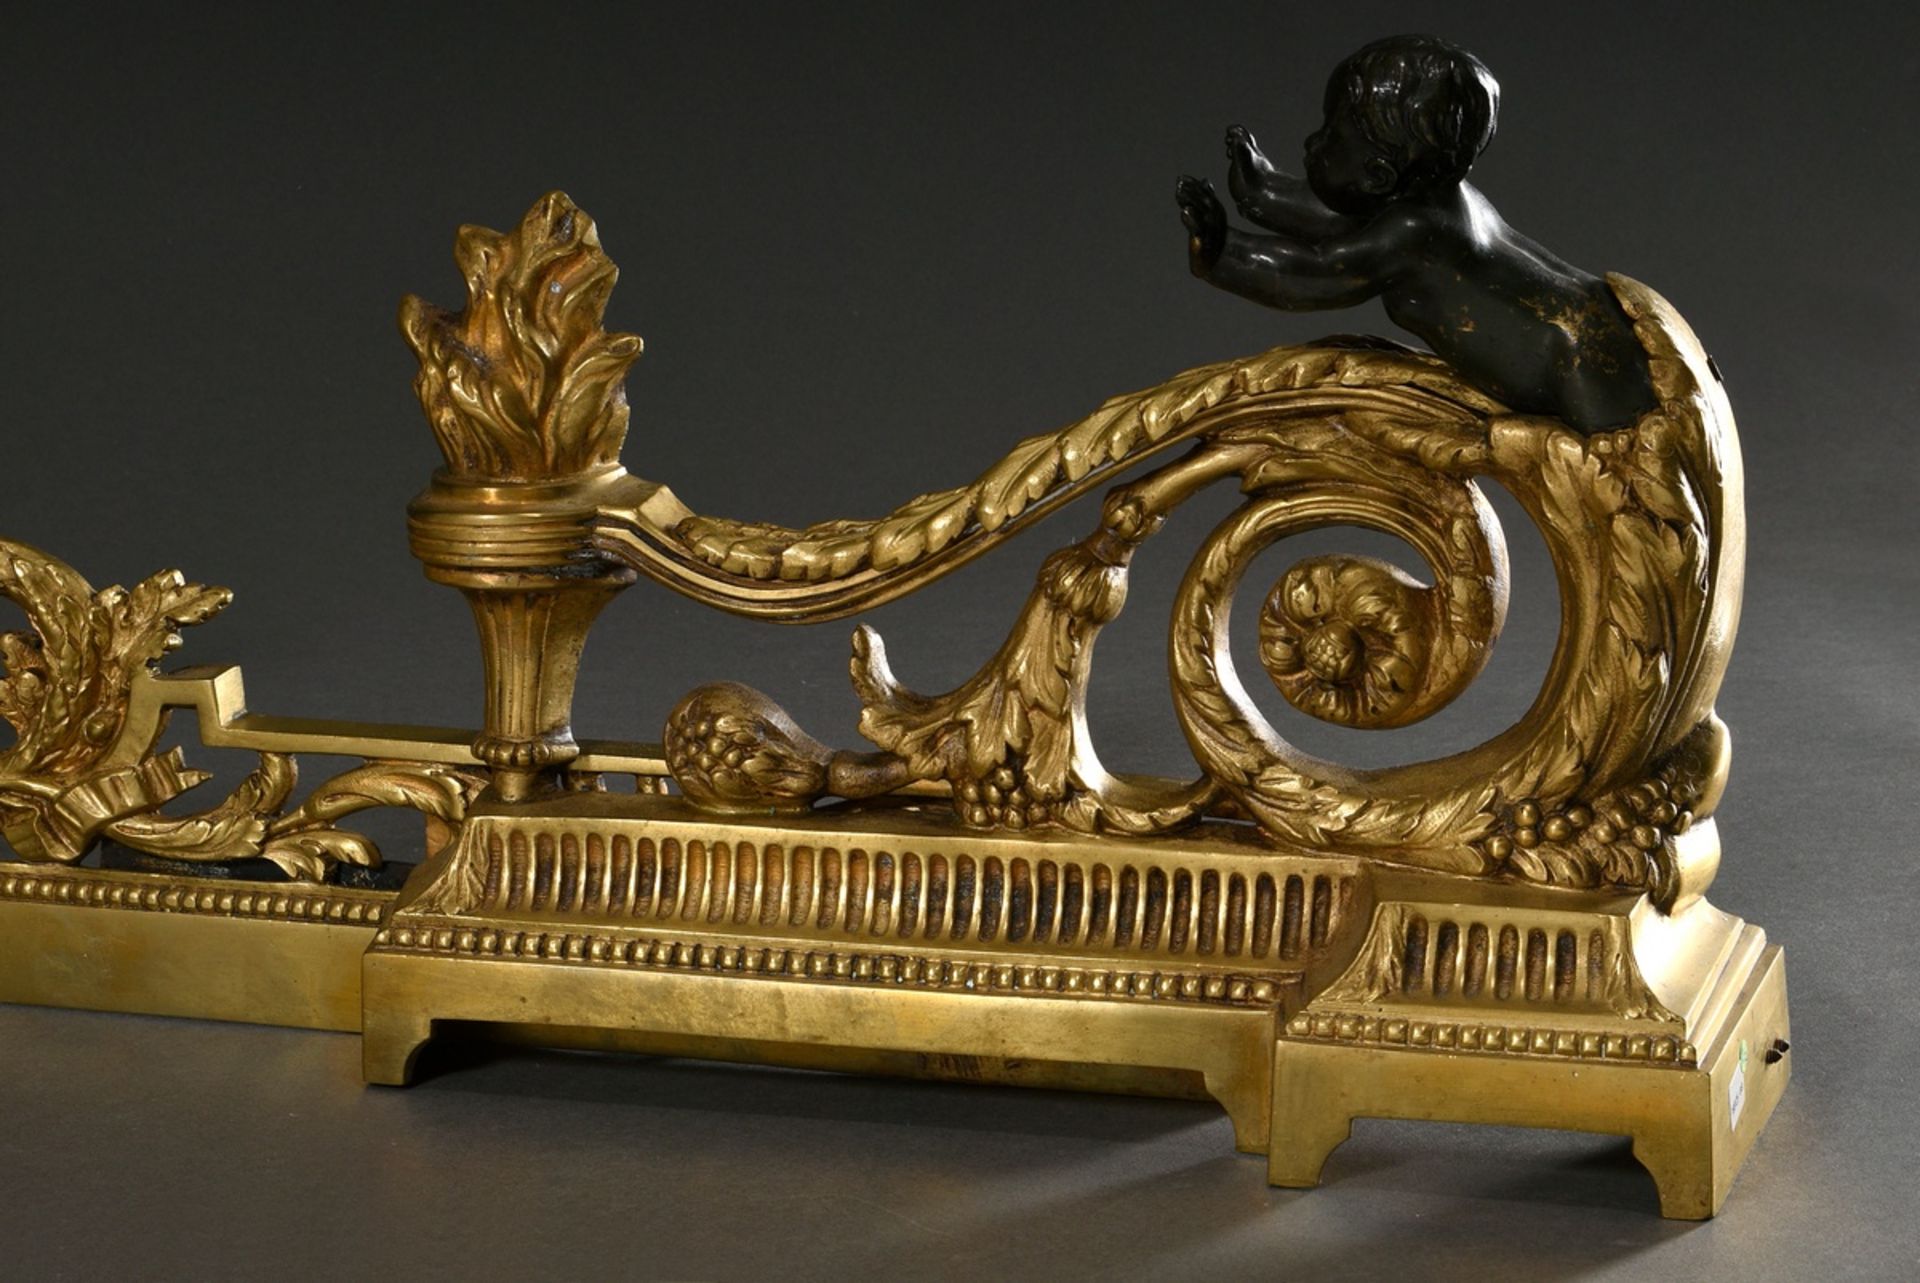 French brass mantelpiece in Louis XVI style with leaf volutes, flame vases and laurel wreath motif, - Image 2 of 7